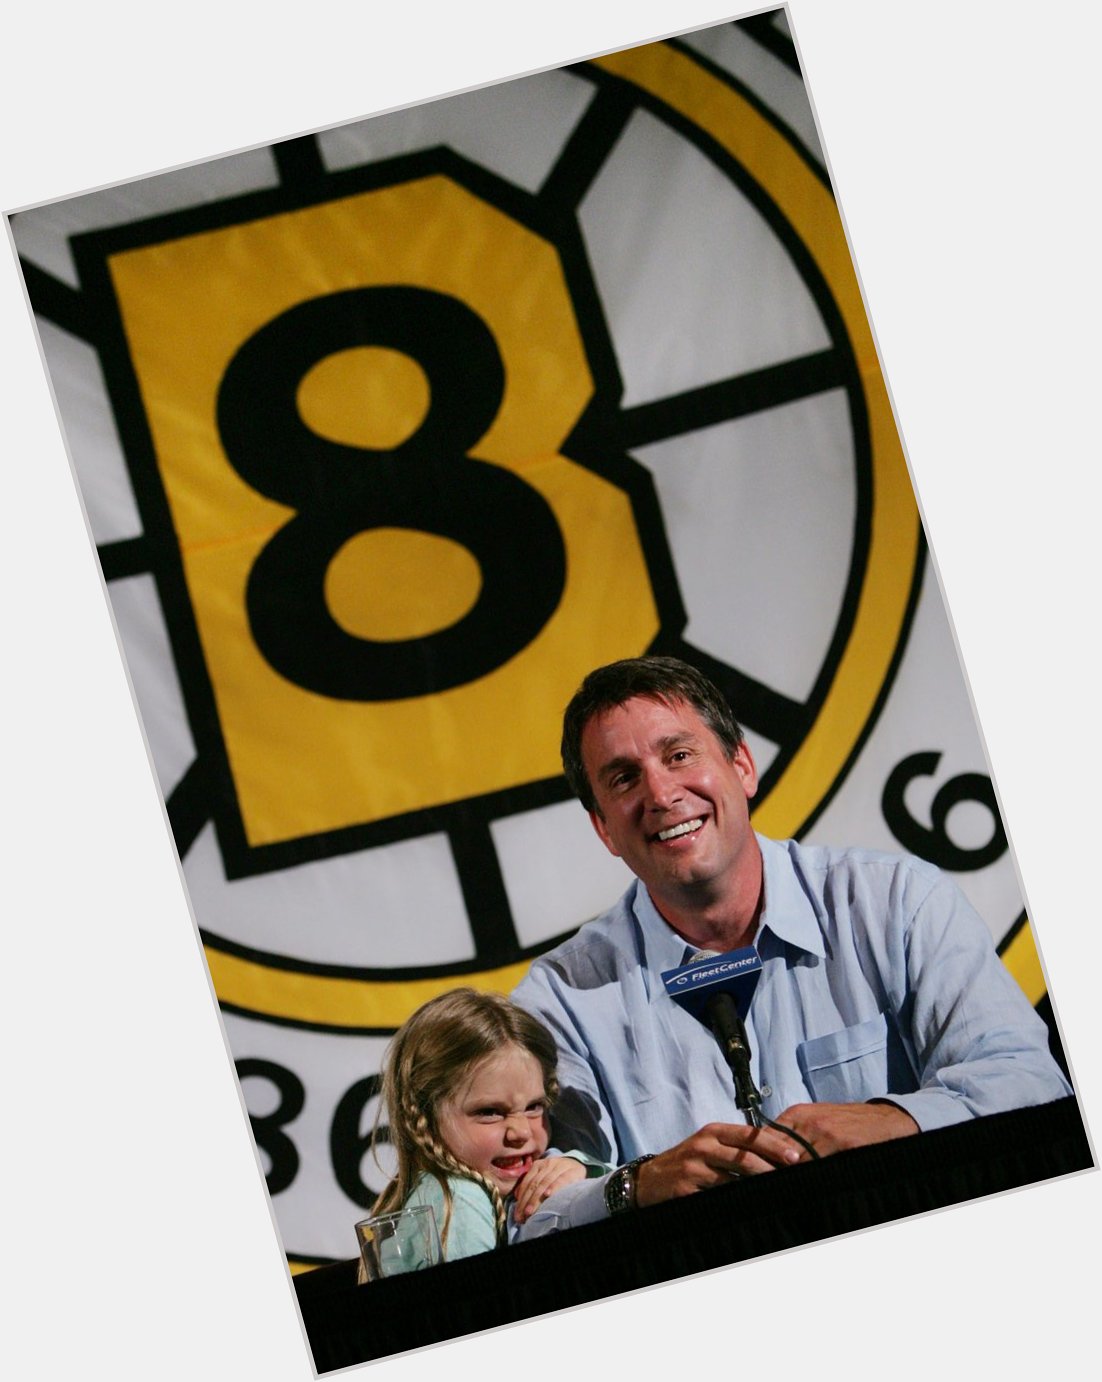 Happy 55th Birthday to Hall of Famer Cam Neely!

His 0.61 goals per game in the postseason ranks 4th in NHL history 